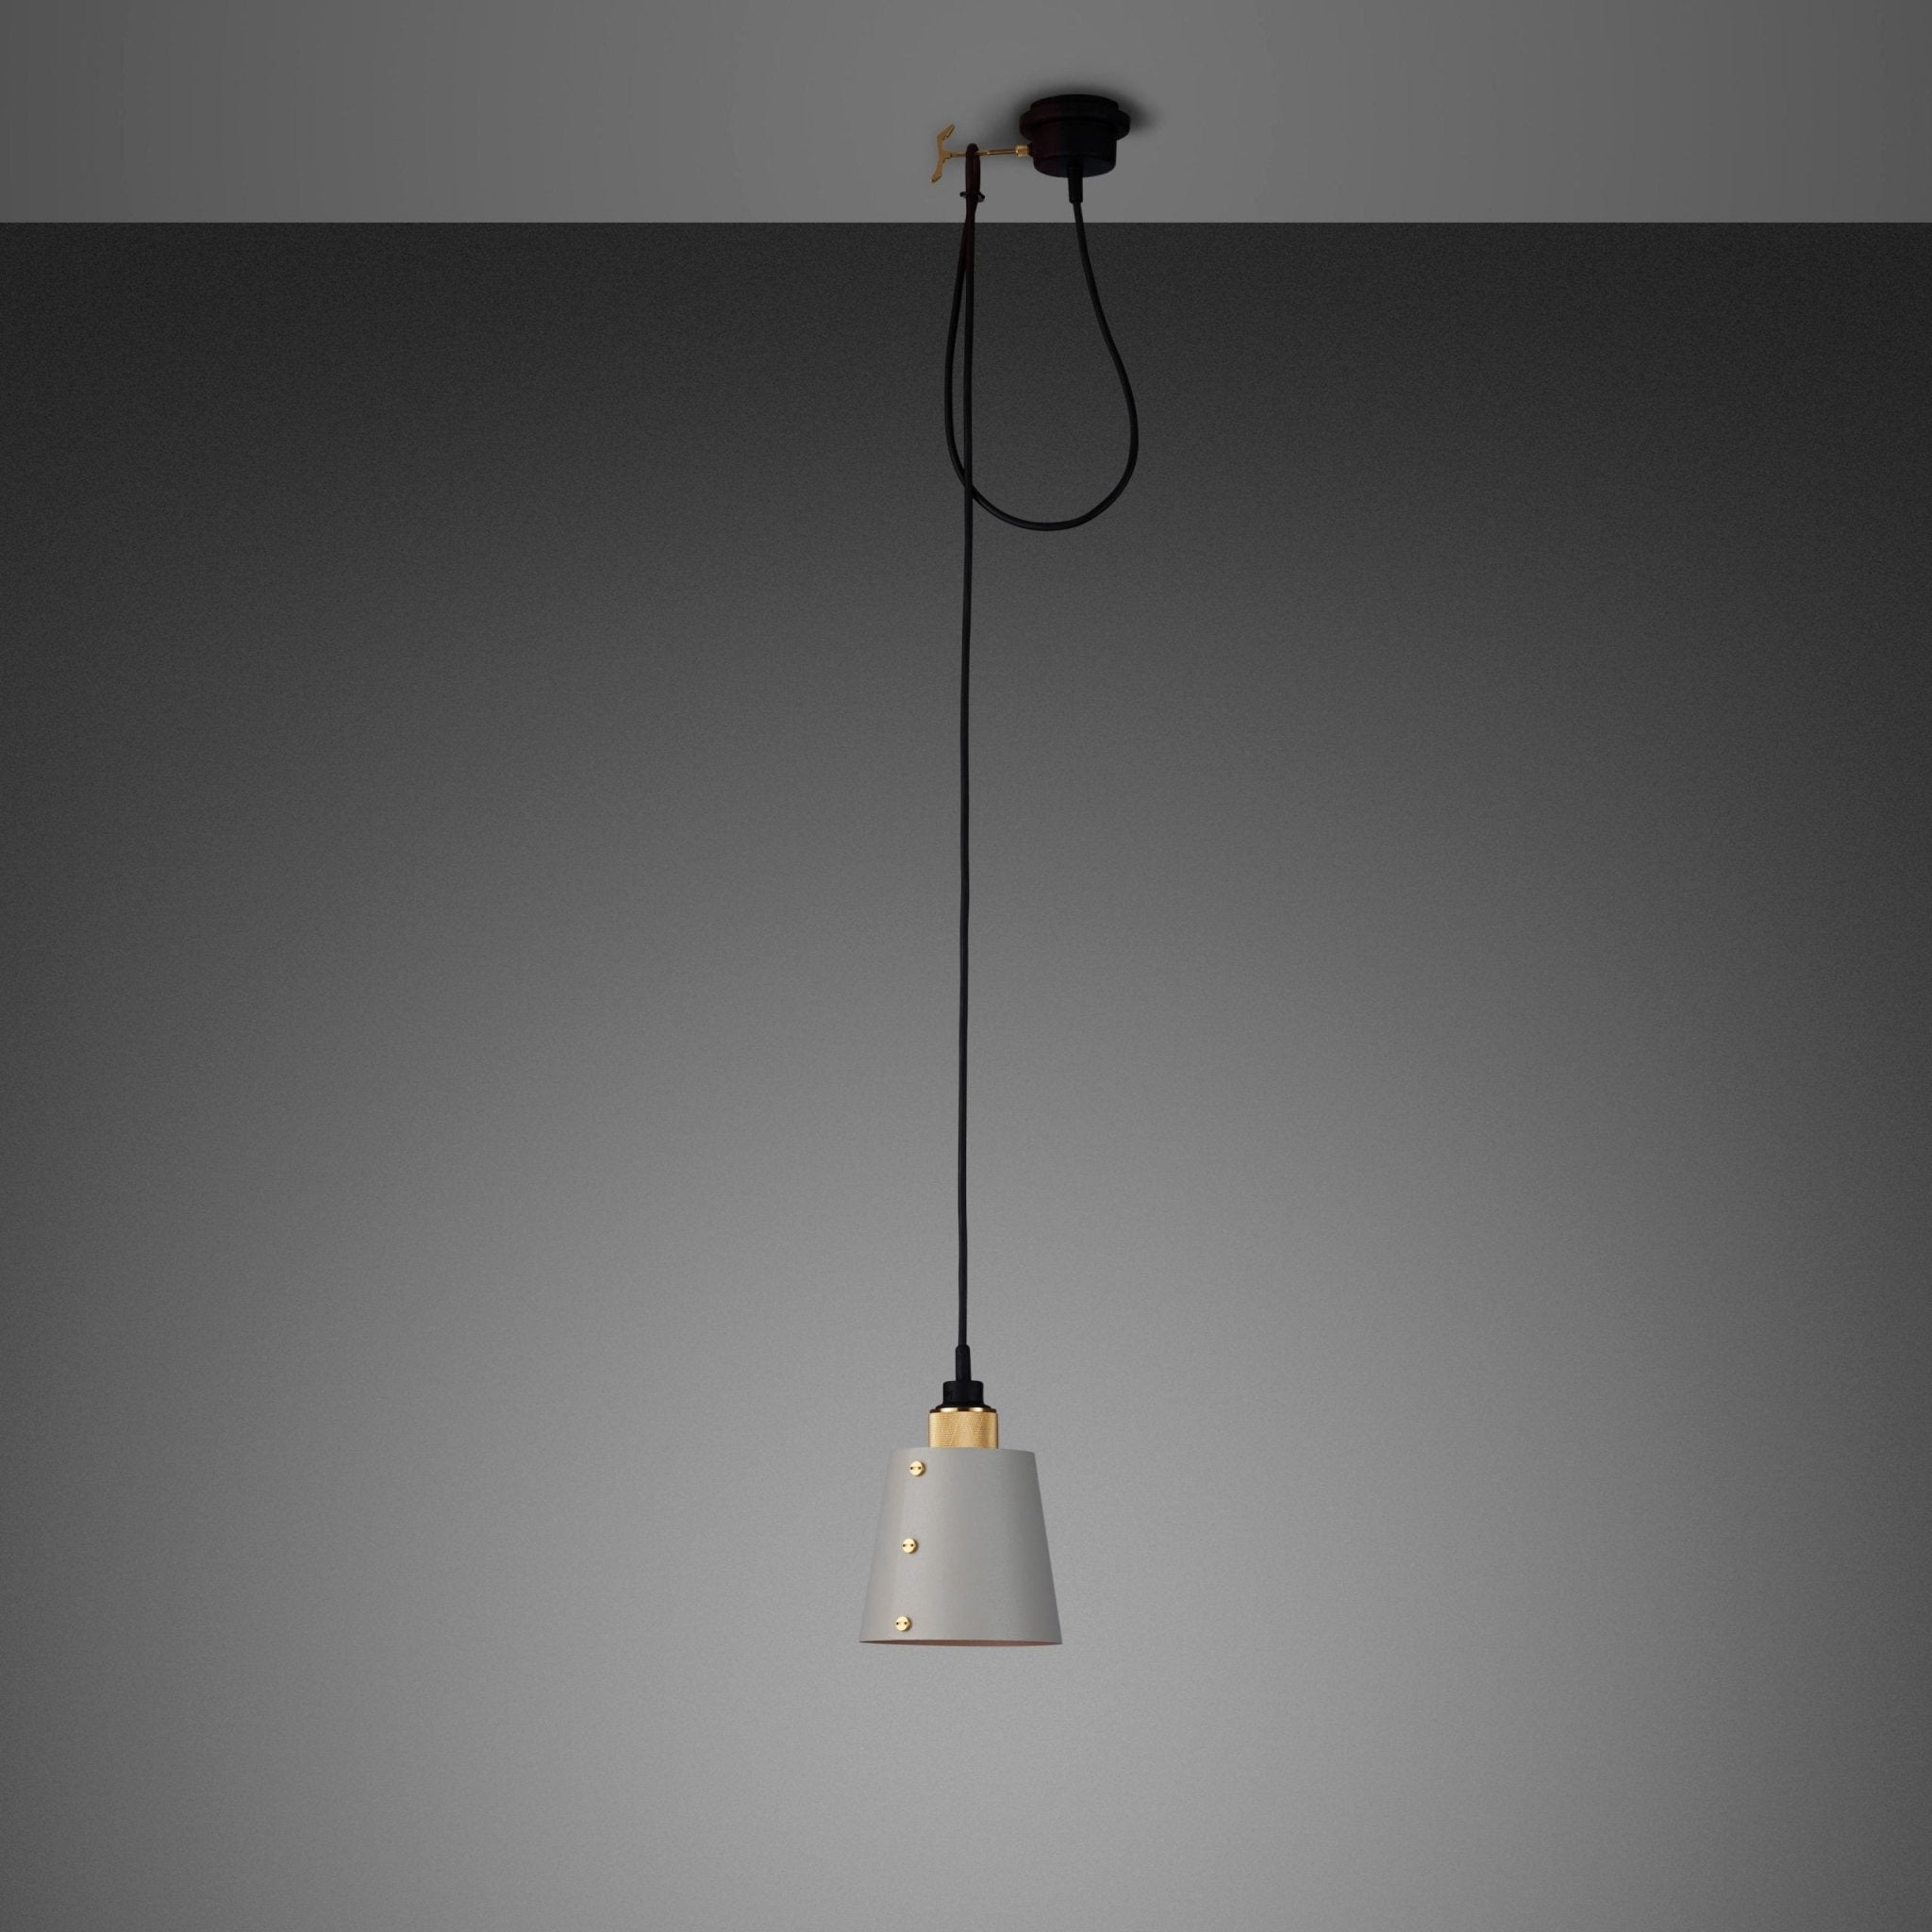 Buster and Punch - Hooked 1.0 / Klein Steen Shade 2.6m Hanglamp - KOOT